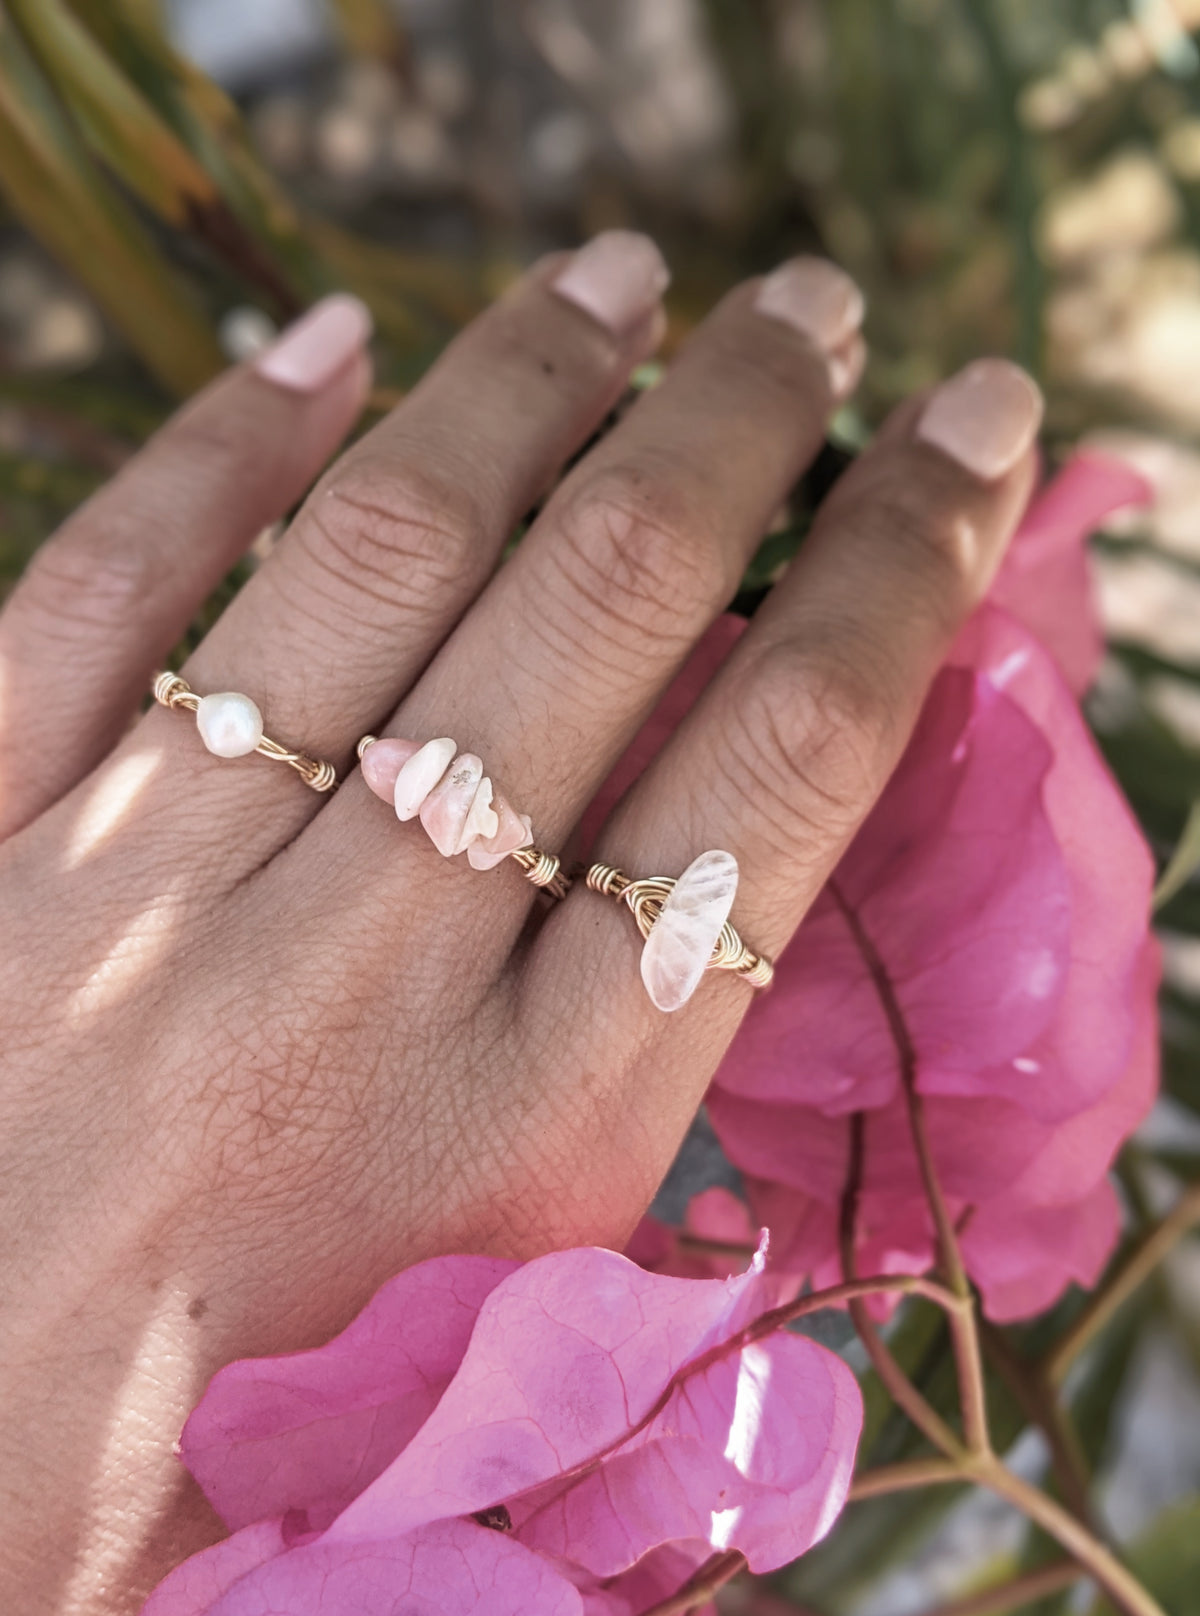 The Best Stacking Rings For the Pastel Danish Aesthetic